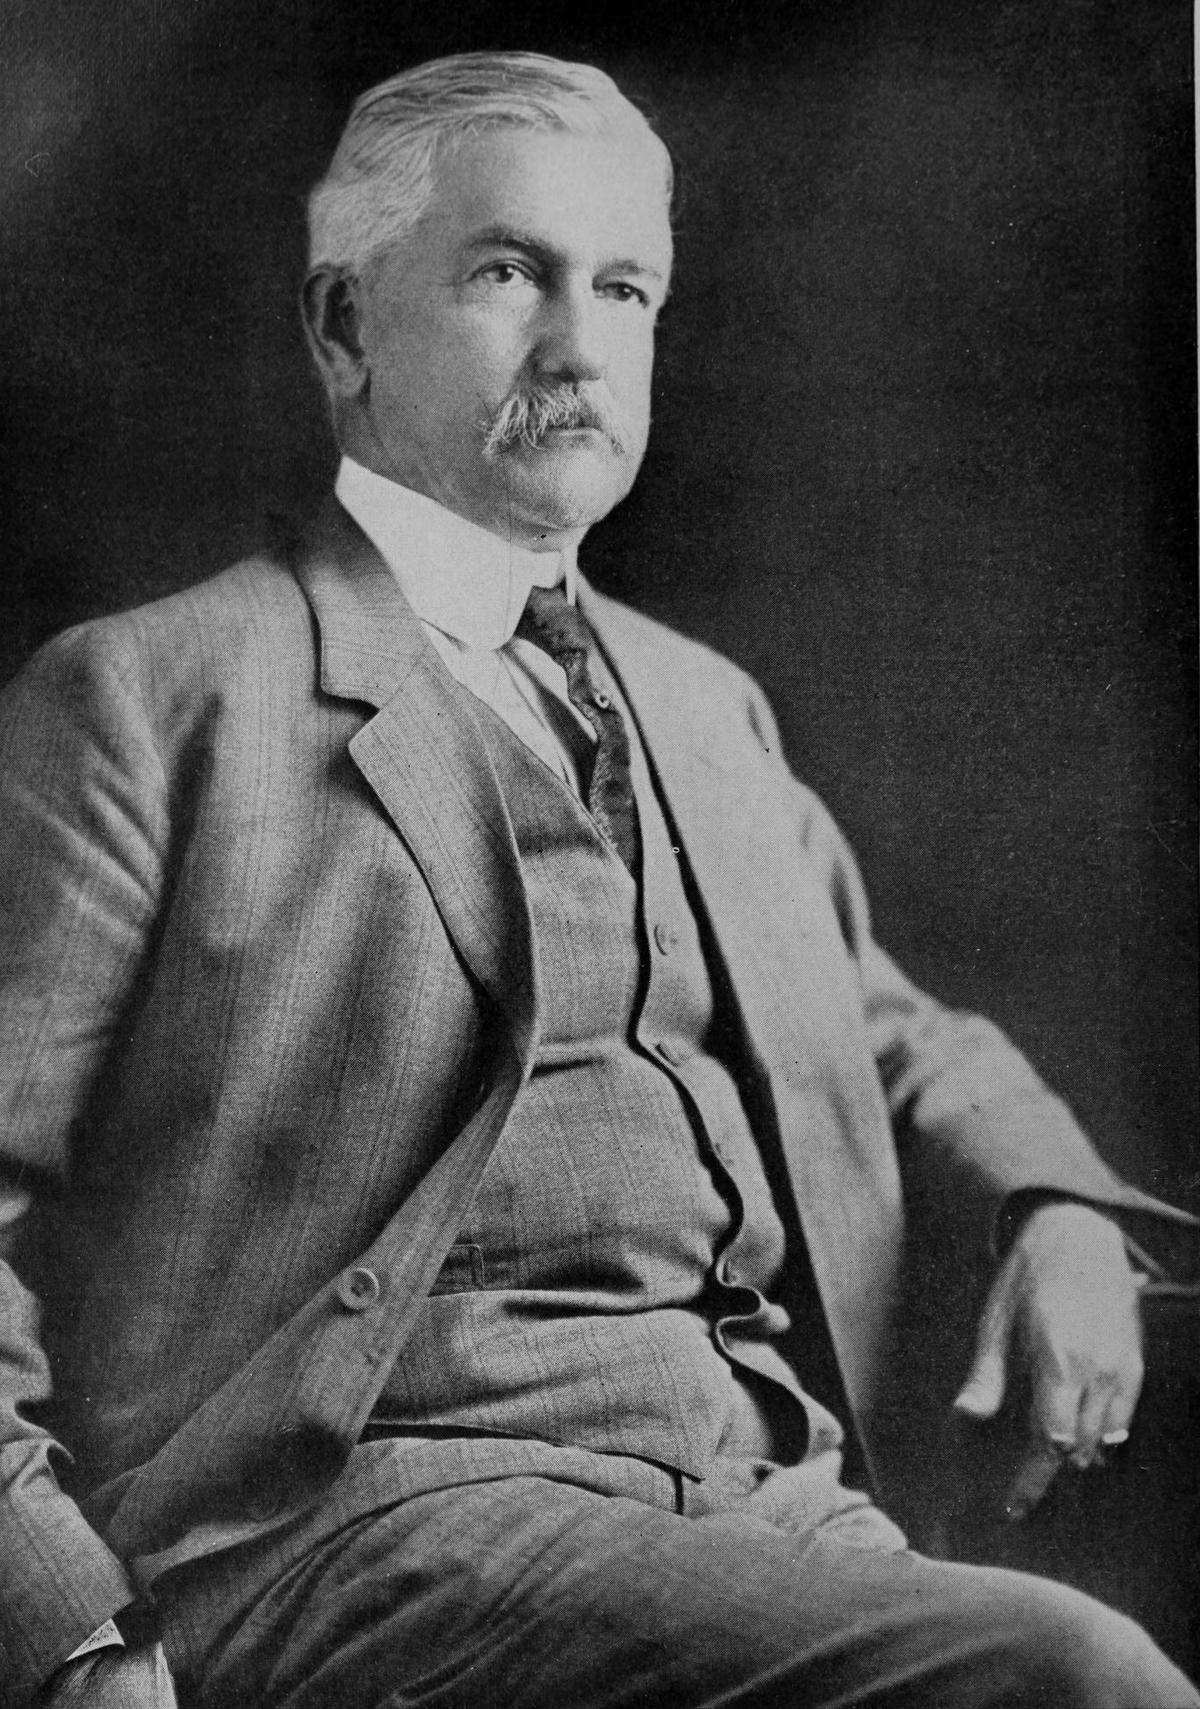 William Crawford Gorgas (1854–1920) was instrumental in saving thousands of lives from yellow fever during the construction of the Panama Canal. (Public domain)